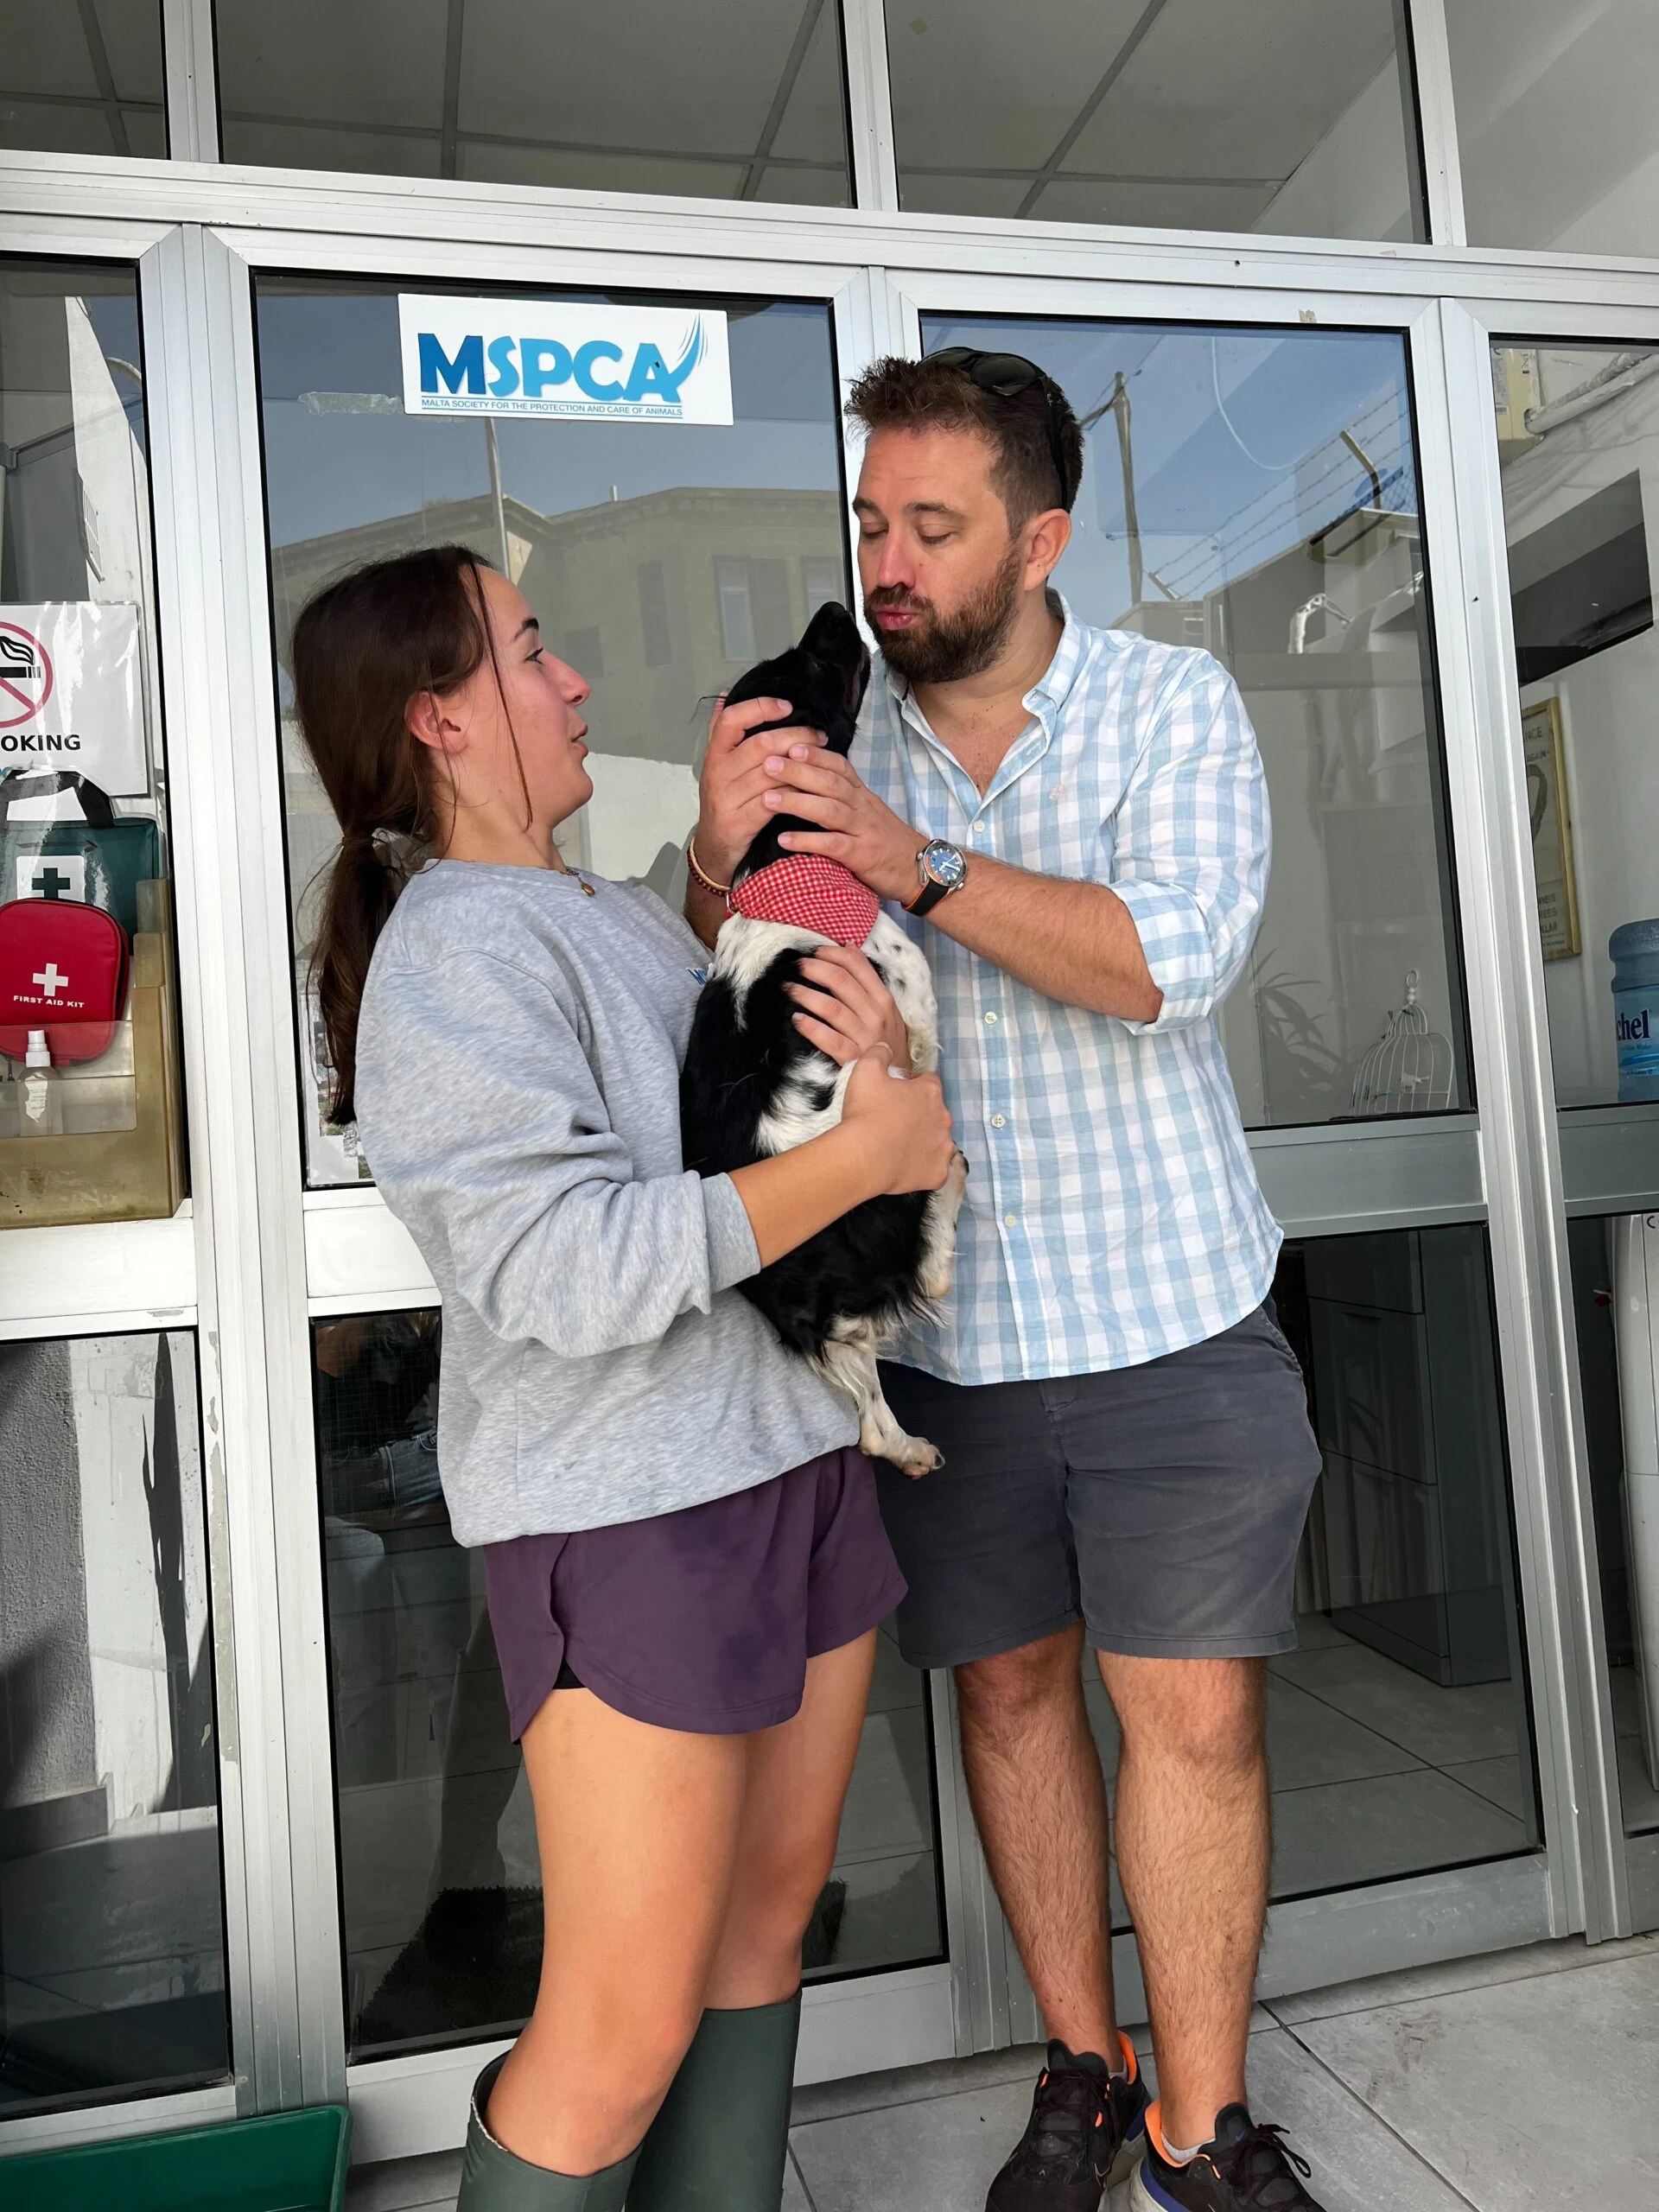 Phil Pearson, CEO of White Label Casinos, visits dogs and cats at the MSPCA